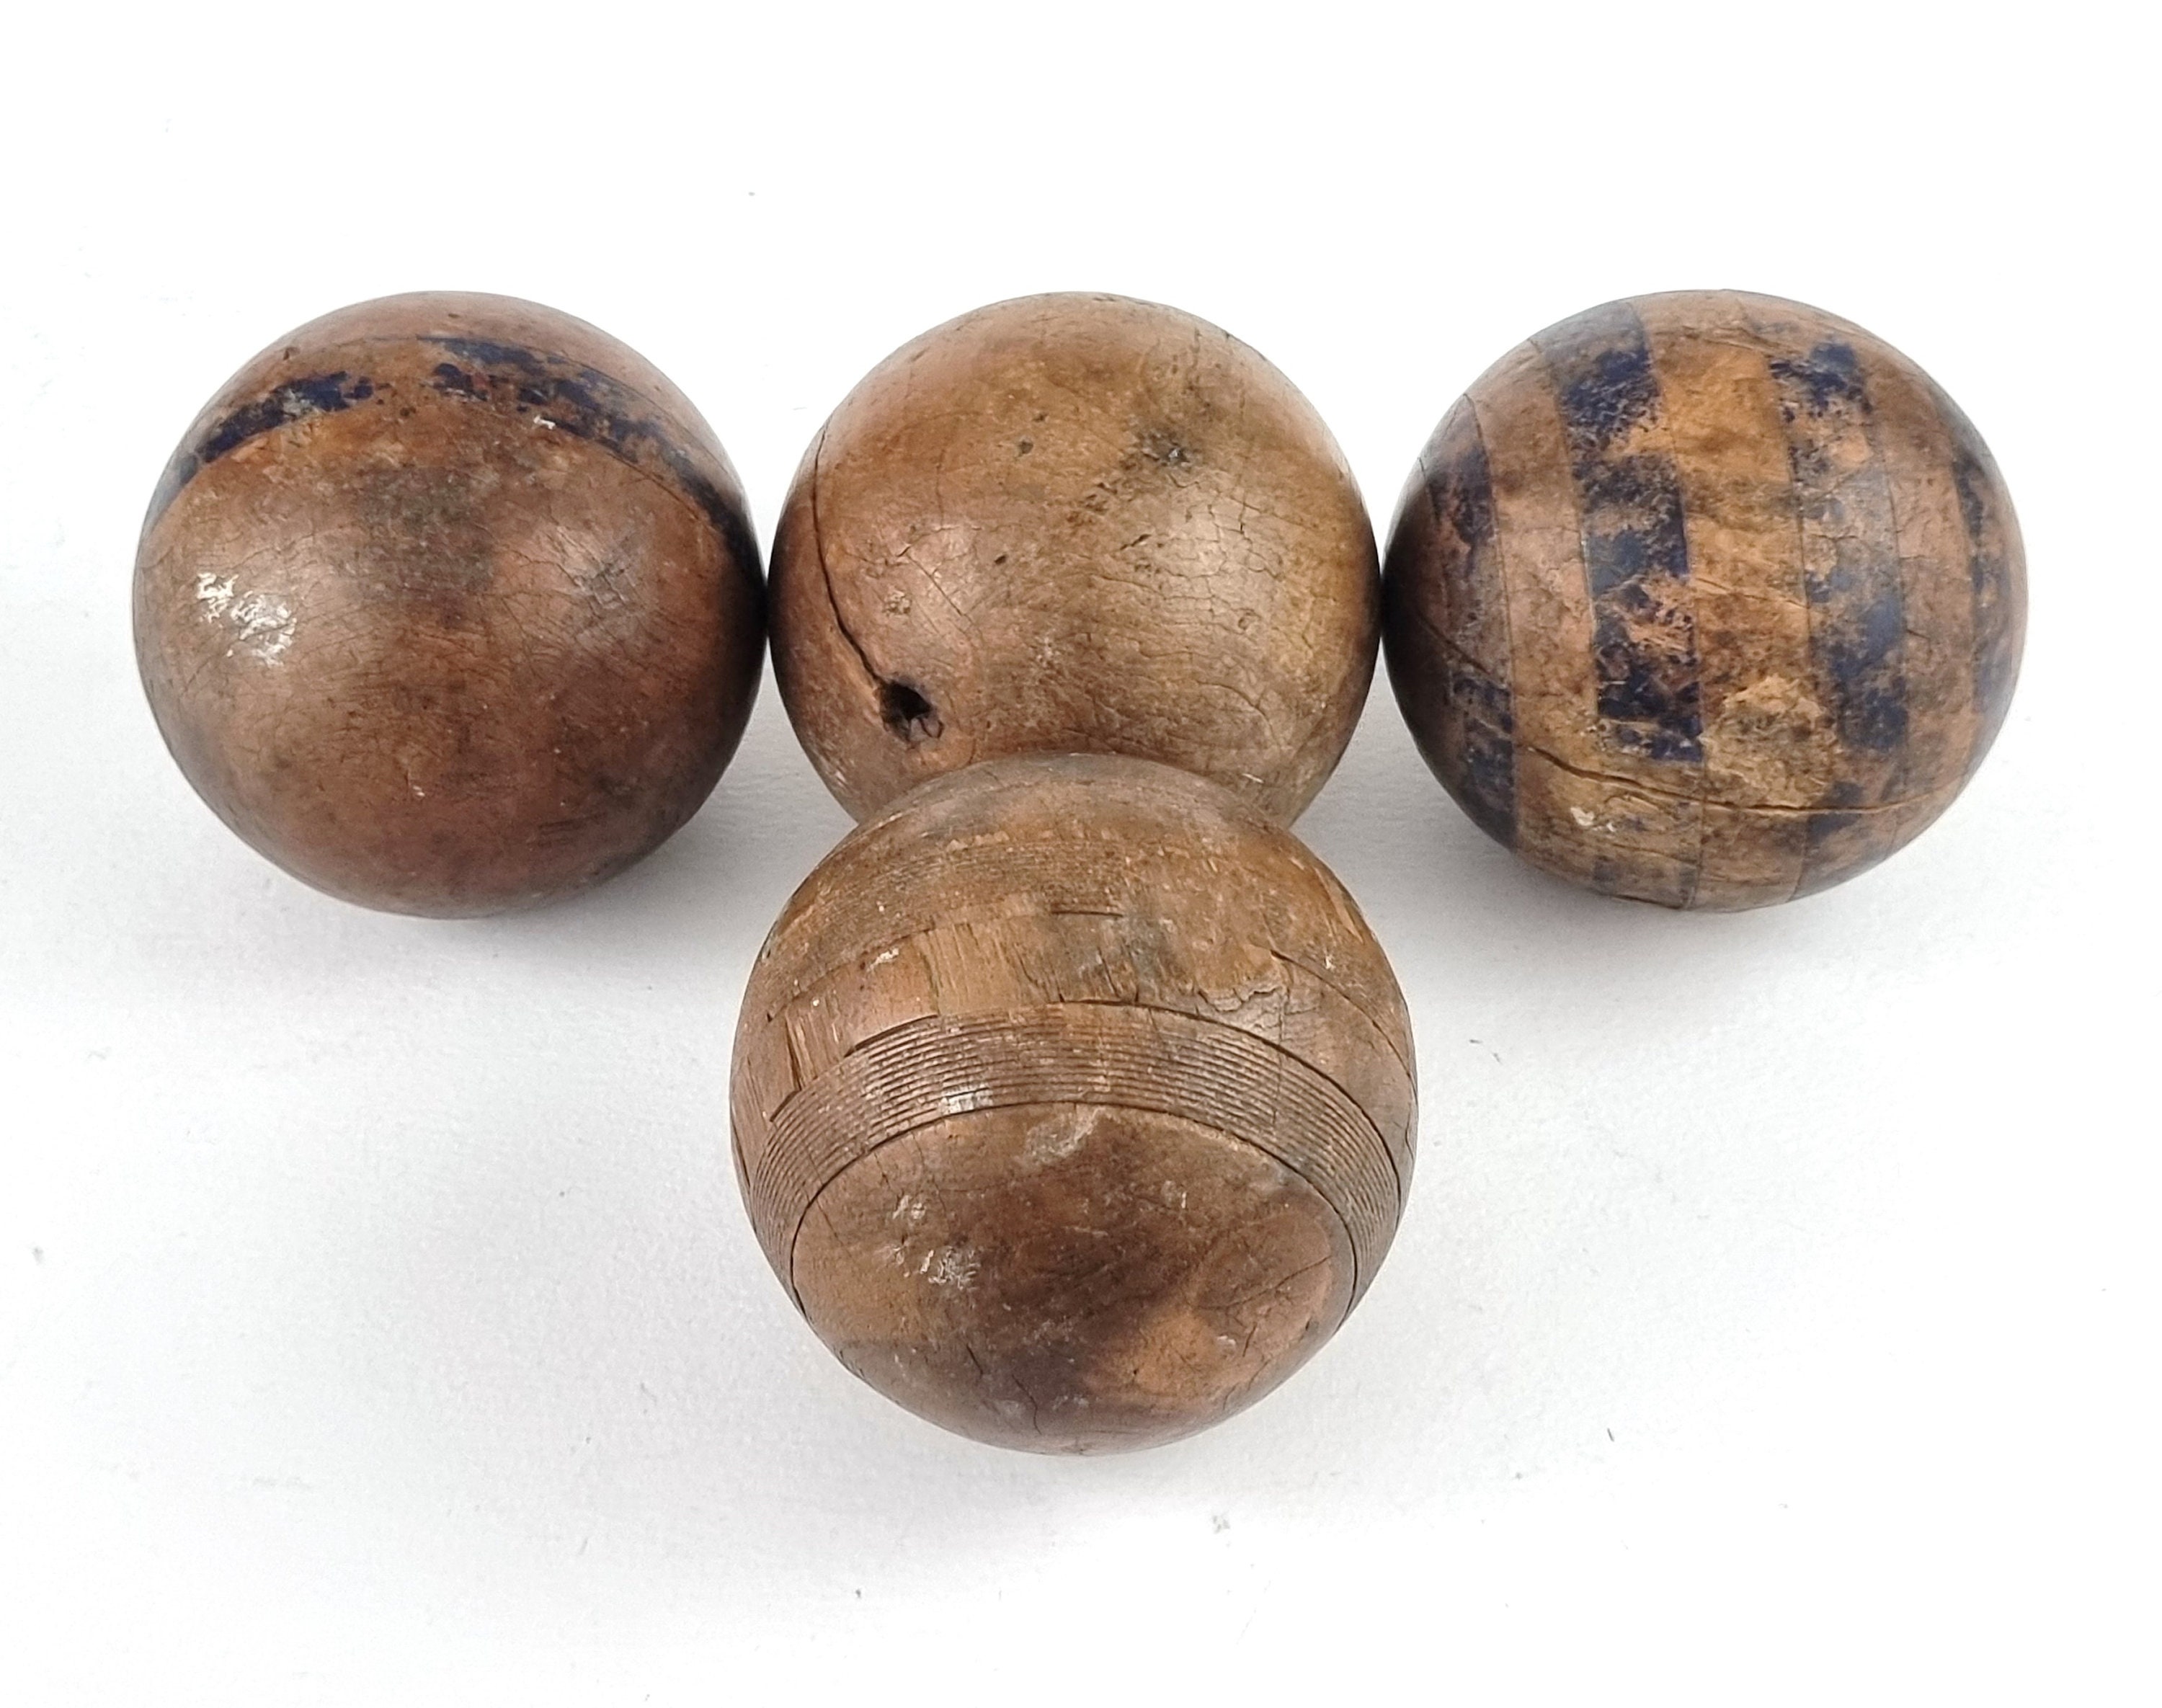 Wooden Balls for Crafts, Unfinished Round Wood Balls, 1/2 Inch Diameter Wooden  Balls, for Crafts and DIY Projects, Small Wooden Balls 